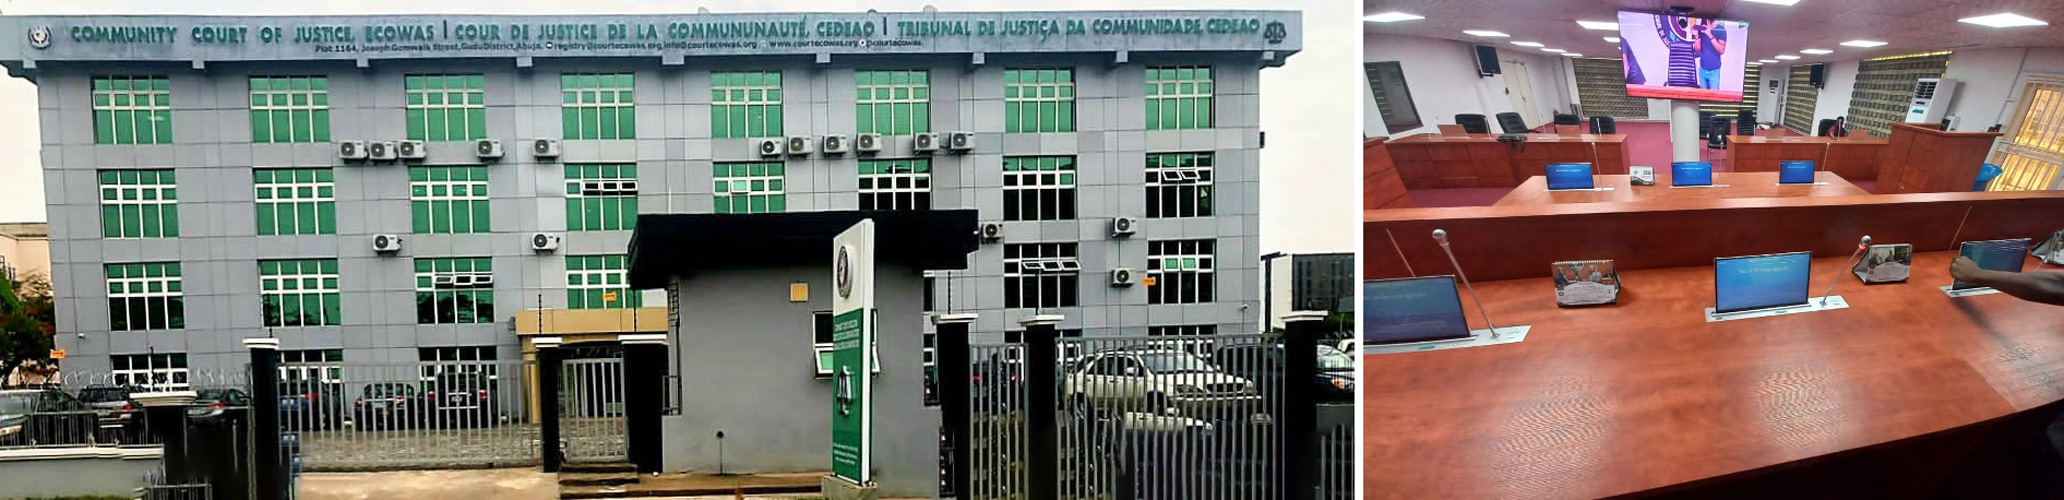 paperless-conference-system-for-ecowas-court-in-nigeria-8.jpg